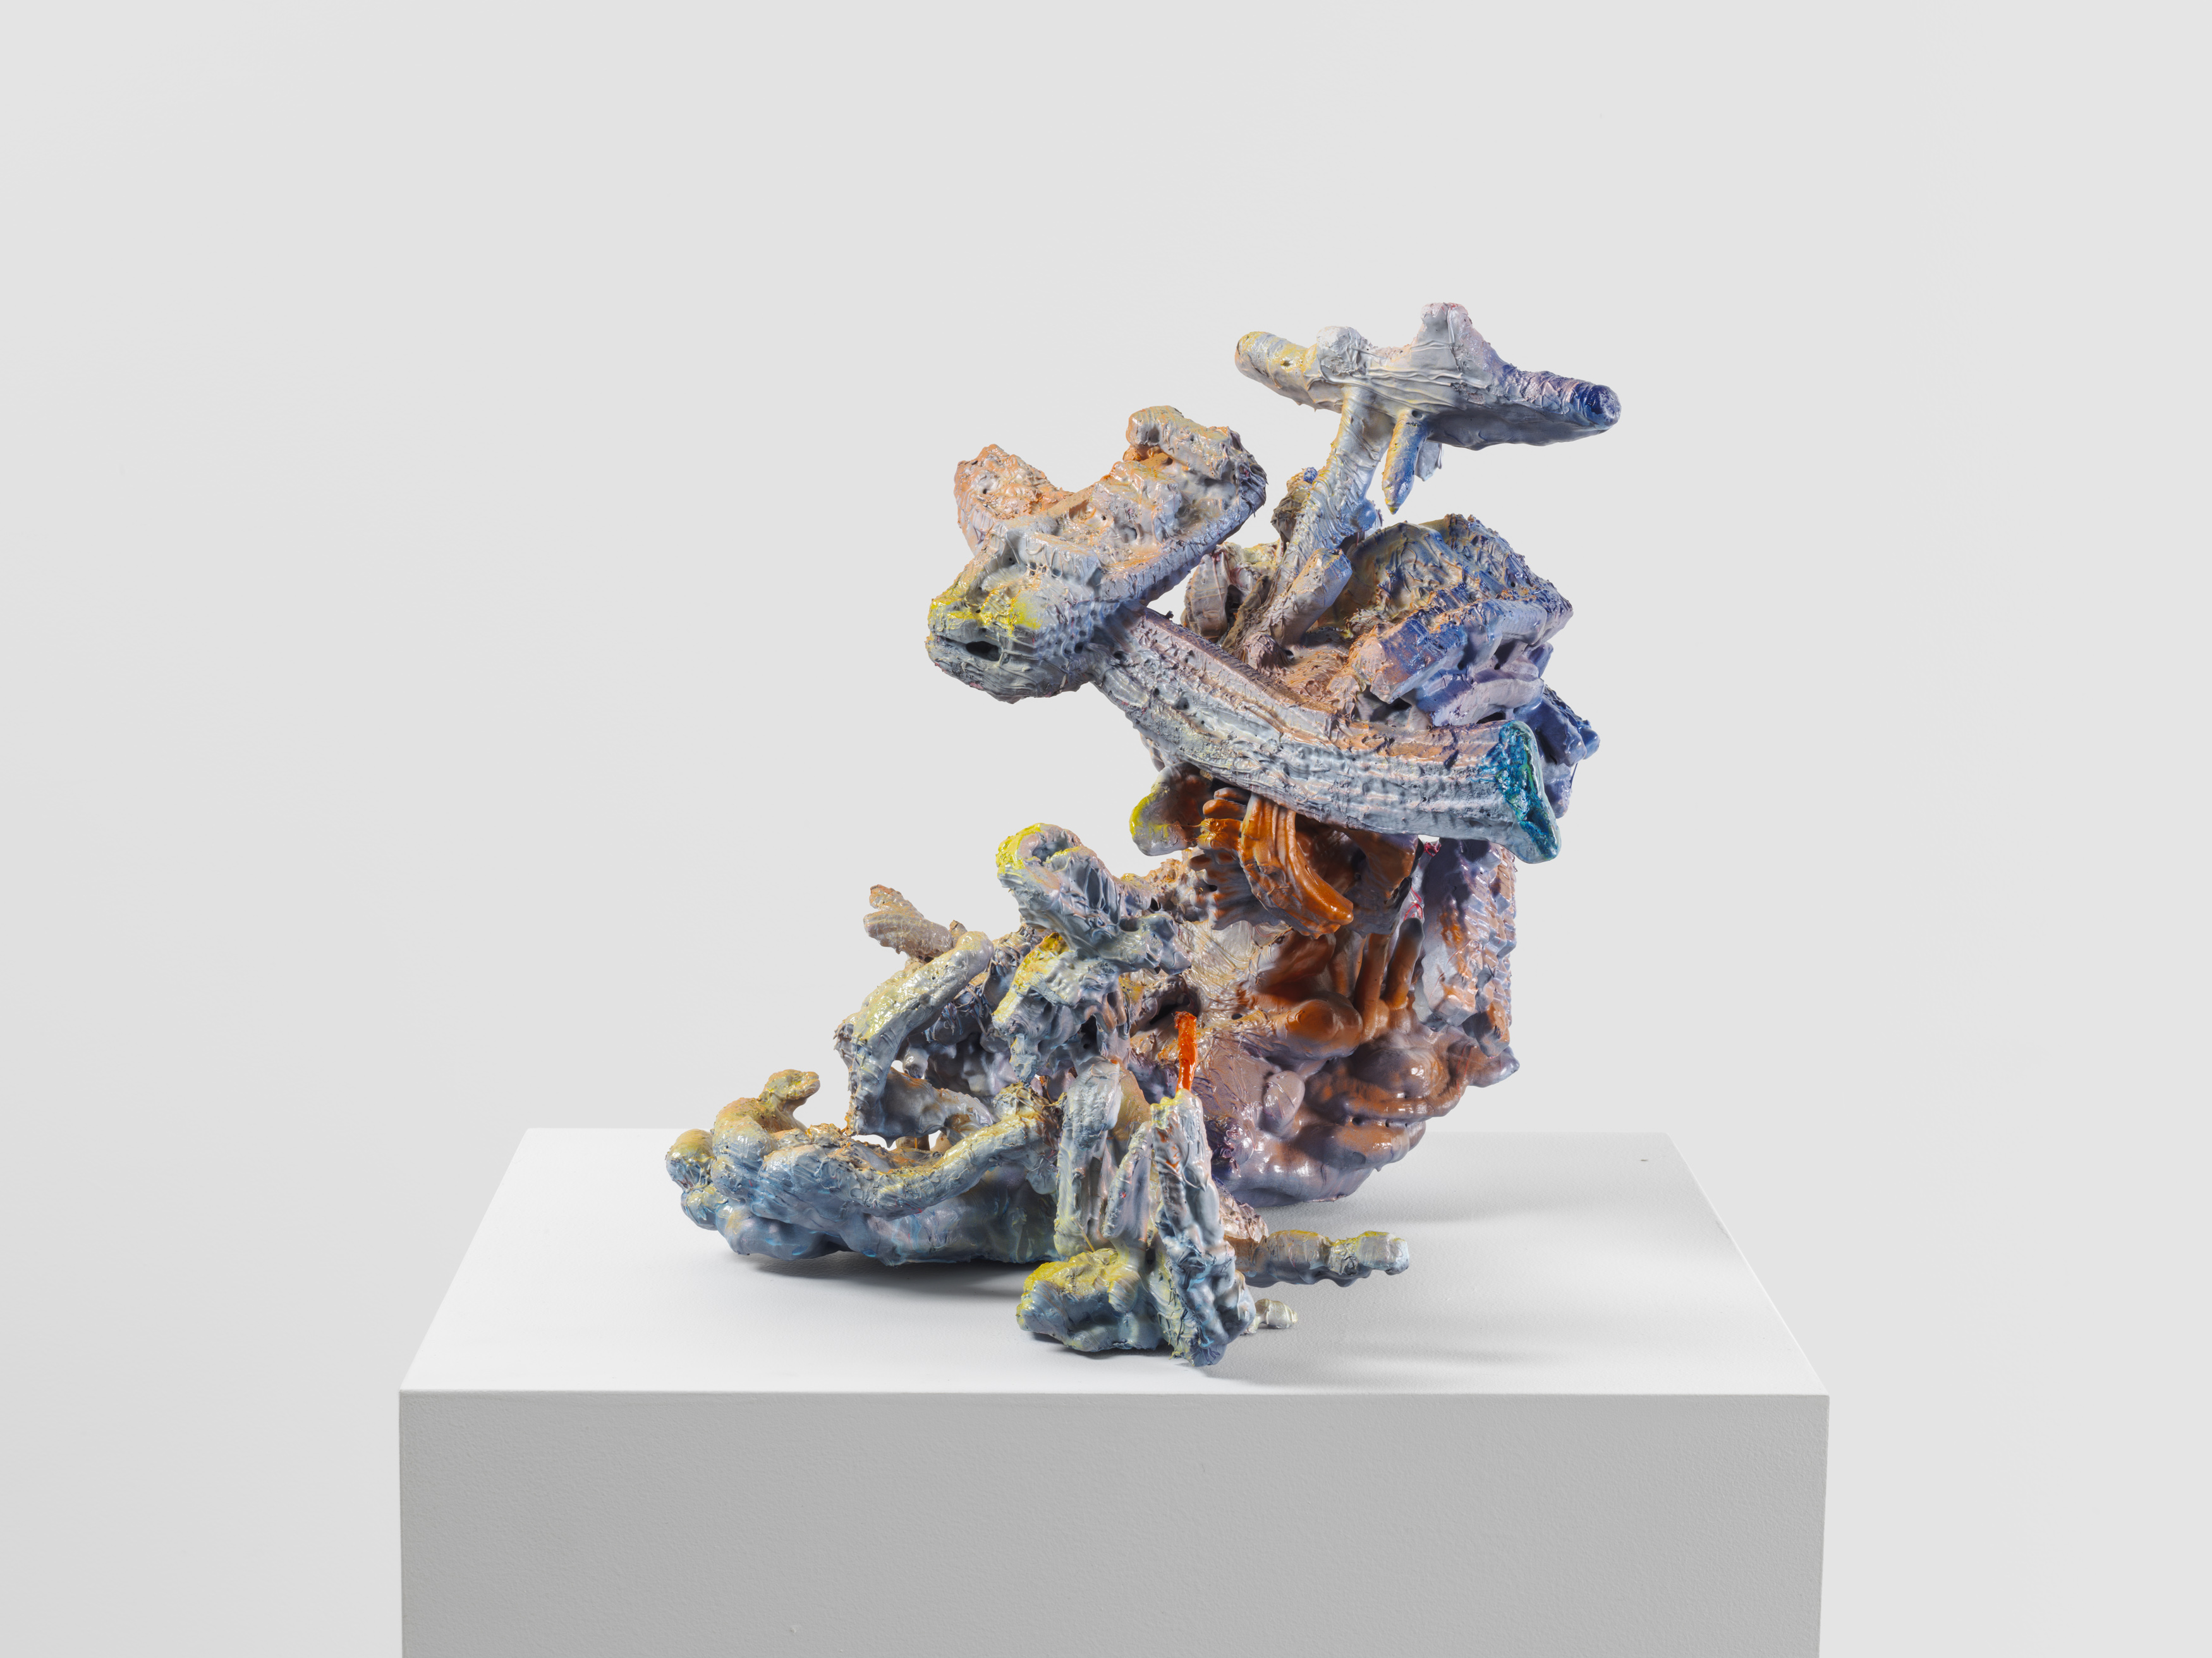 Leelee Kimmel B 612, 2018 3D Print 35.3 x 37.1 x 37.8 cm (13 7/8 x 14 5/8 x 14 7/8 in.) (SLG-LK-10418) Courtesy of the artist and Simon Lee Gallery